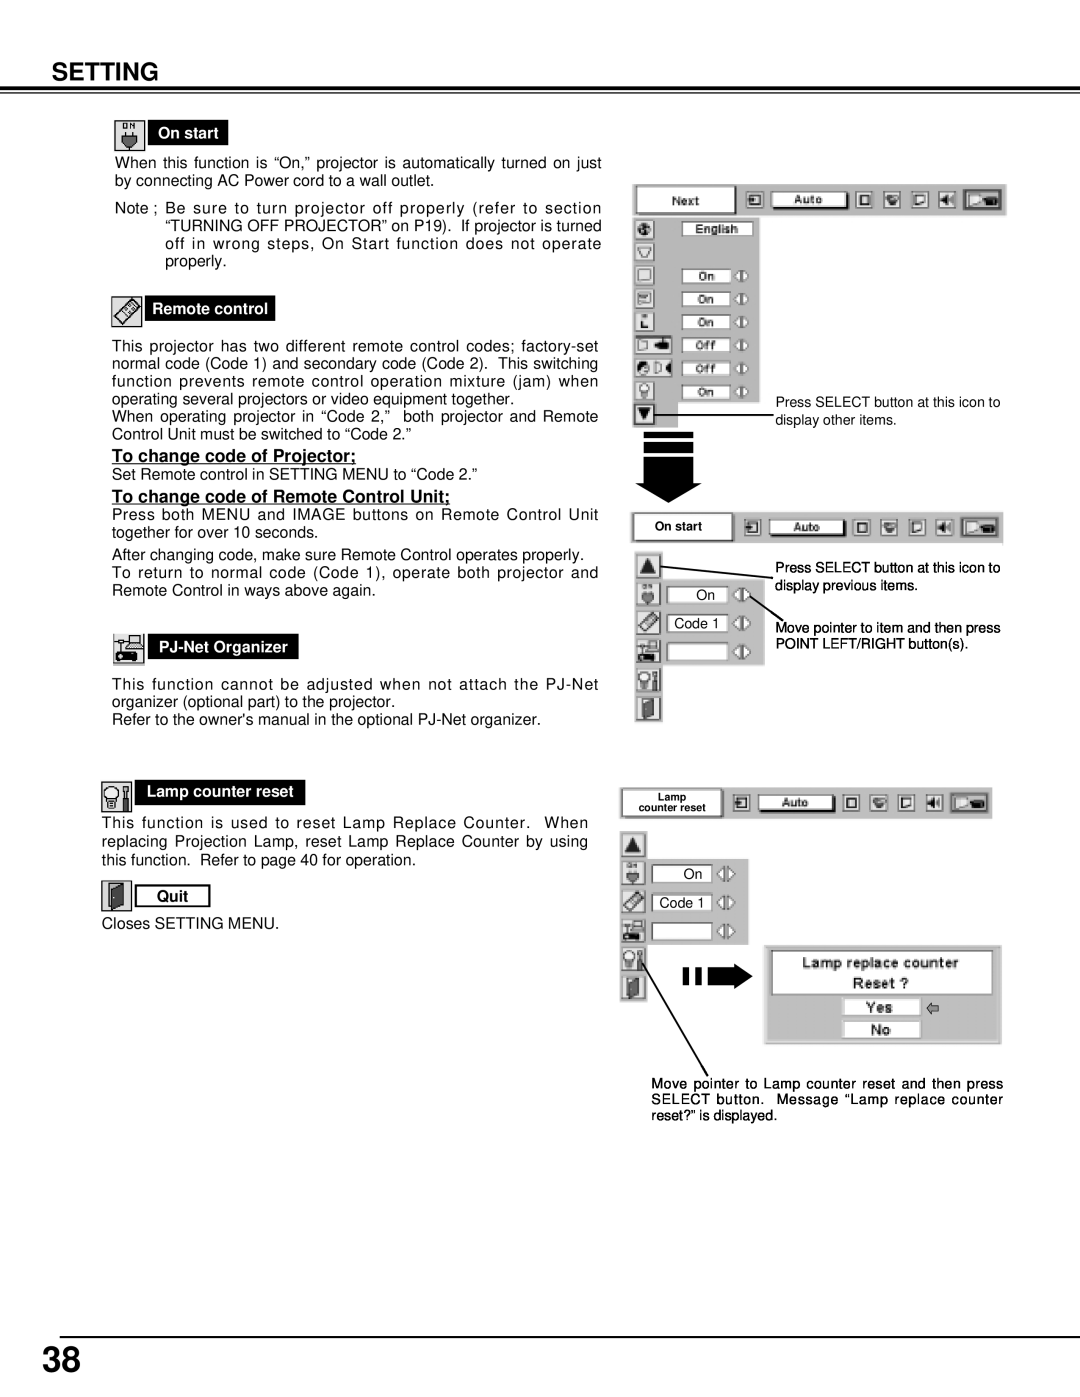 Sanyo PLV-70 owner manual Setting, On start, Remote control, PJ-Net Organizer, Lamp counter reset, Quit 